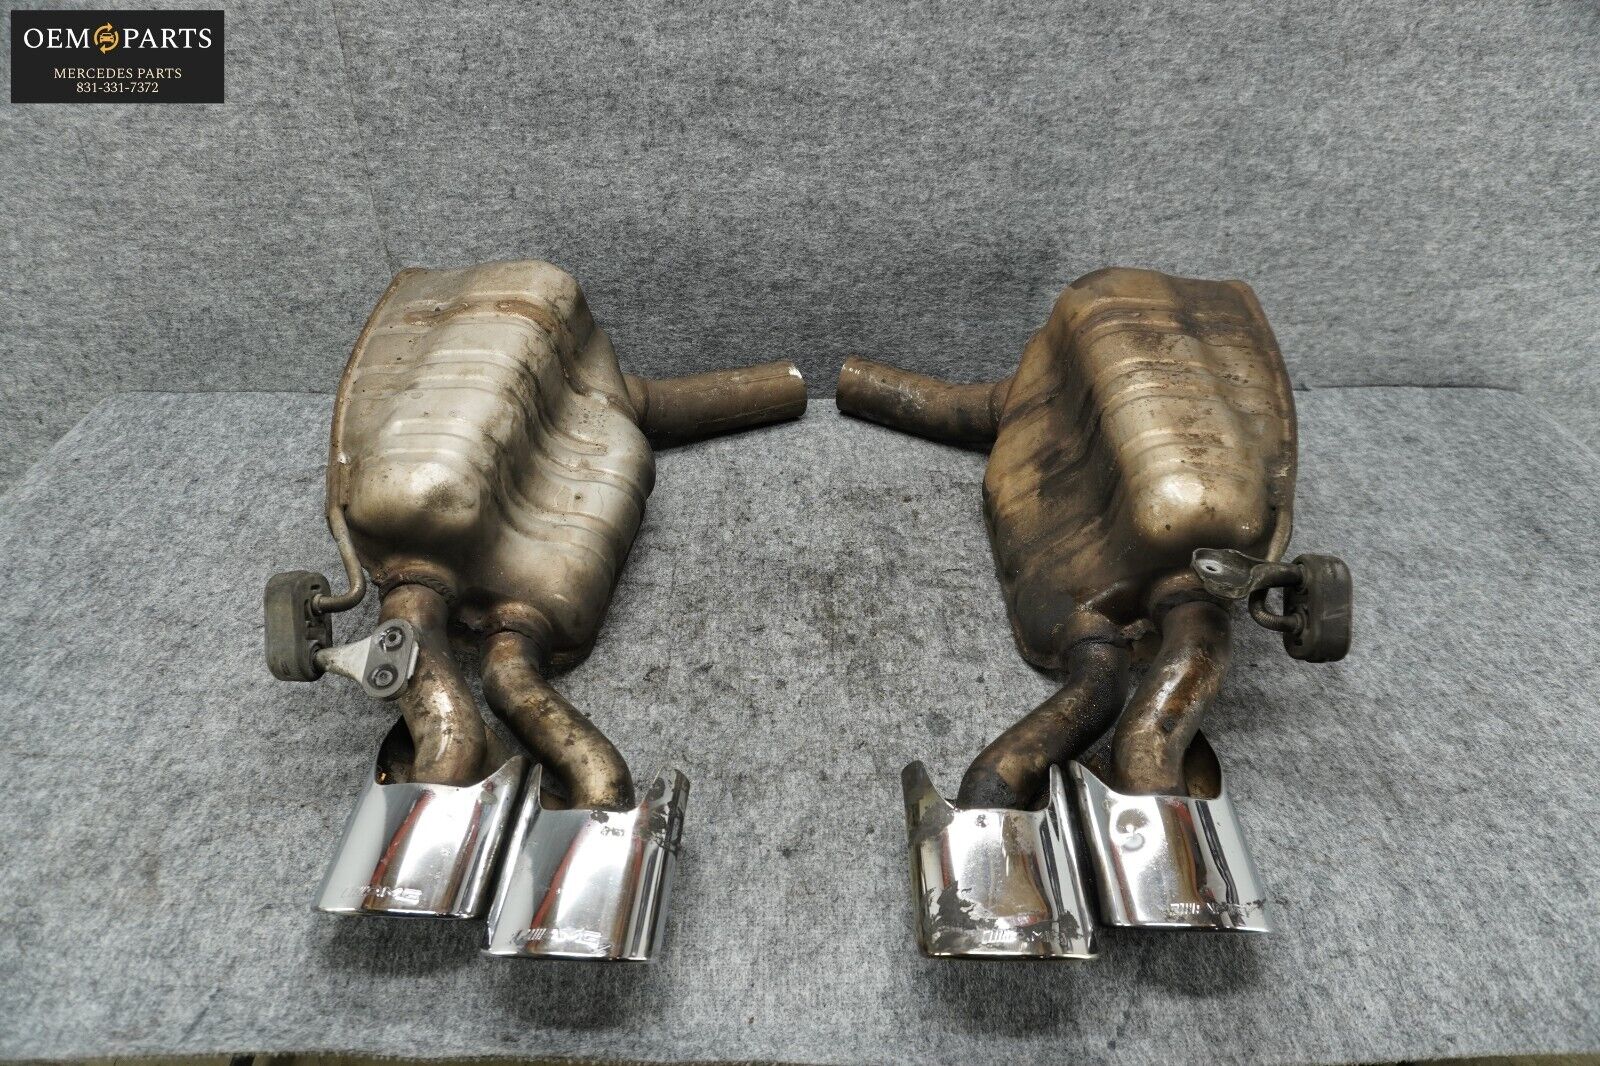 Mercedes W219 CLS55 AMG Exhaust Mufflers Dual Tips Left & Right Side Set OEM